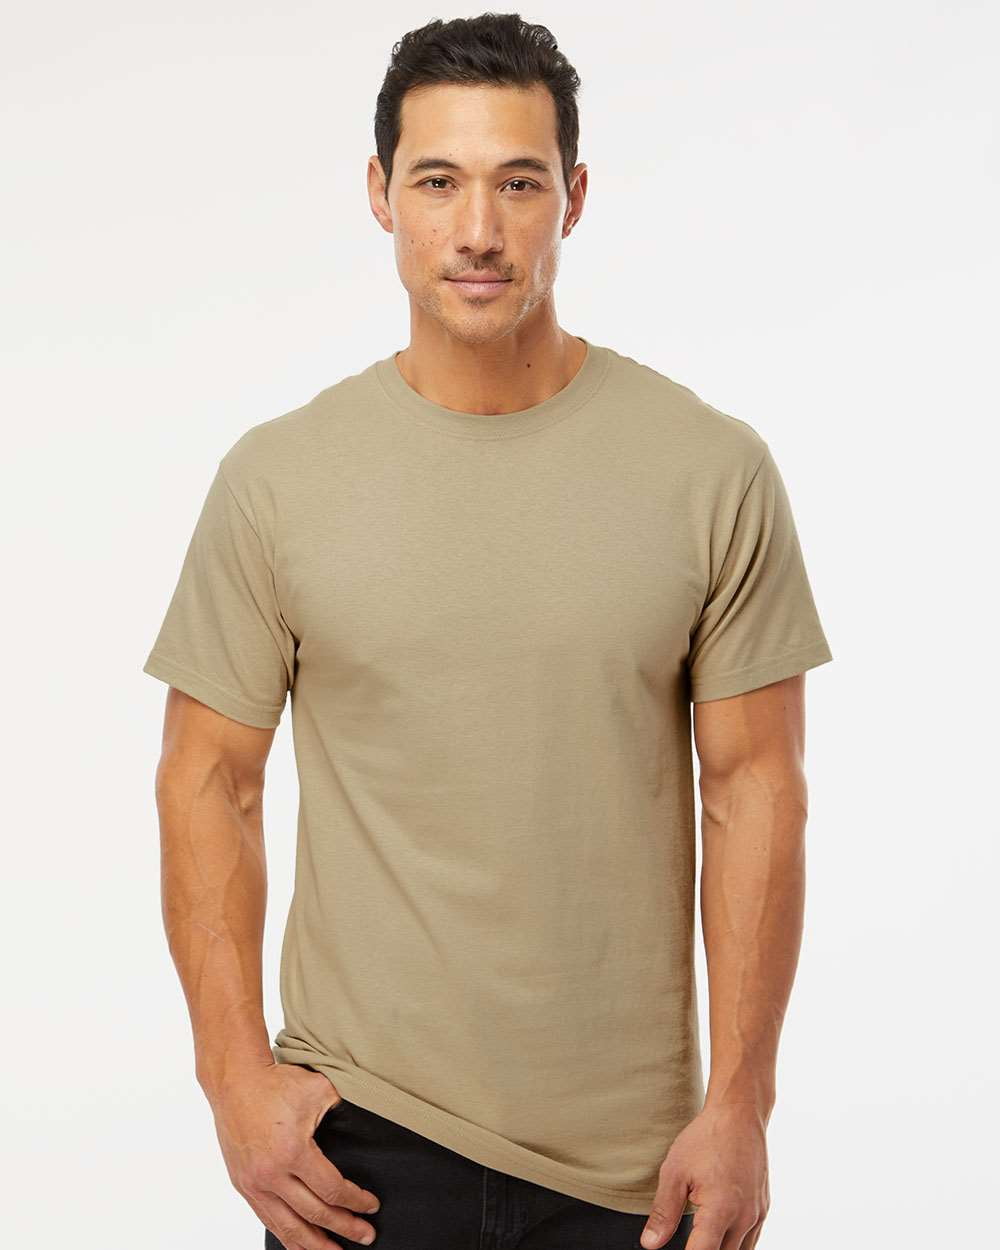 M&O - Gold Soft Touch T-Shirt - 4800 - Sand - Size: L